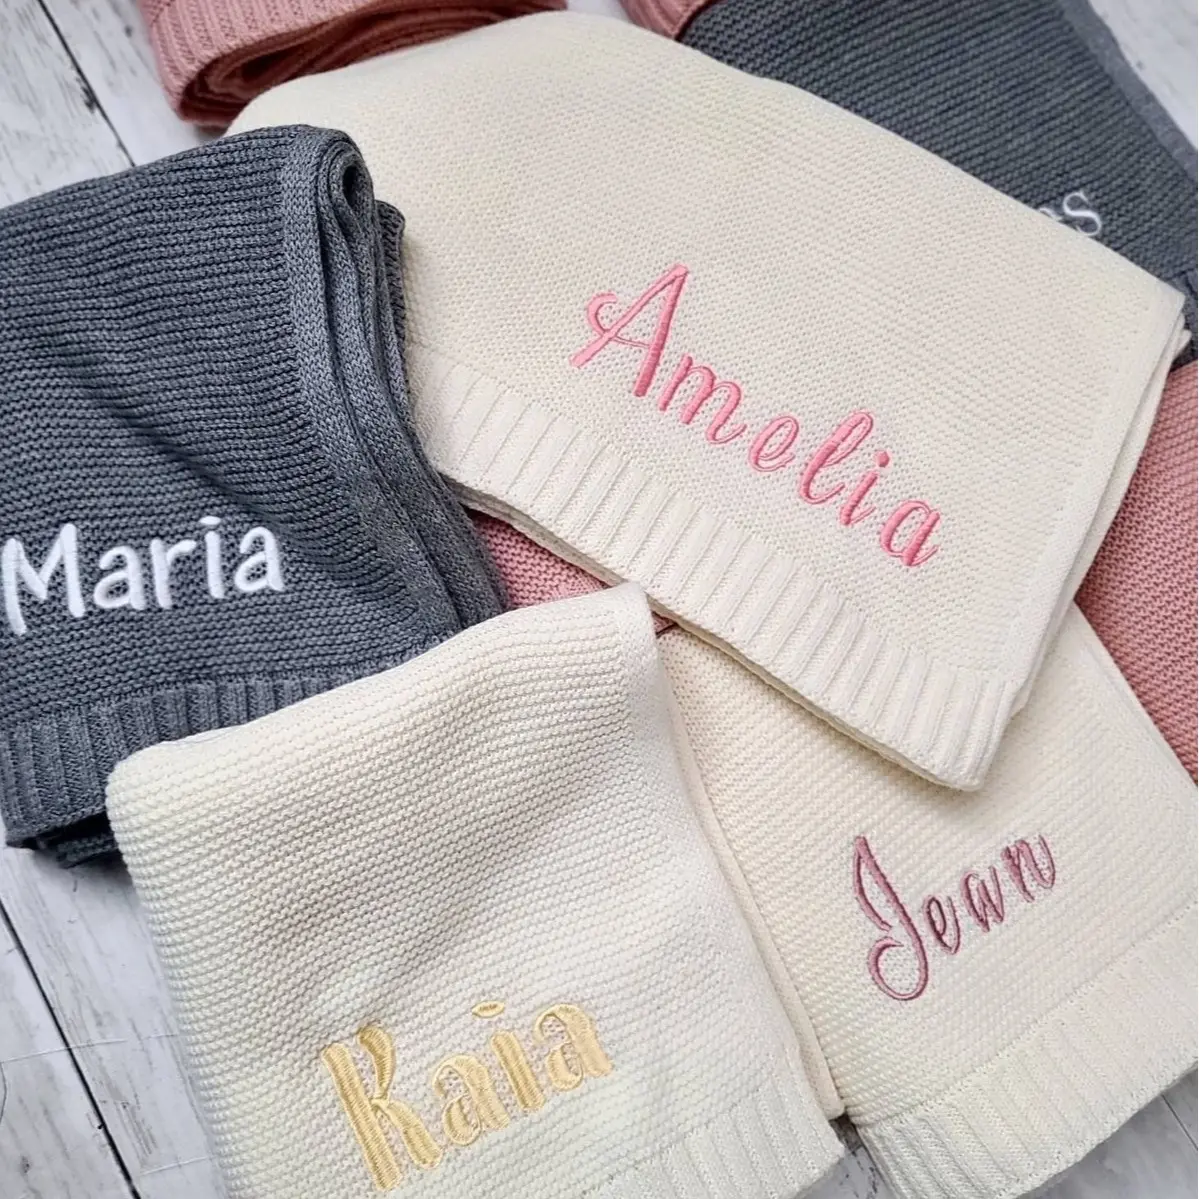 Monogrammed Newborn Baby Gift Soft Cotton Personalized Knit Baby Blanket Embroidery Gift for Baby Shower Stroller Blanket